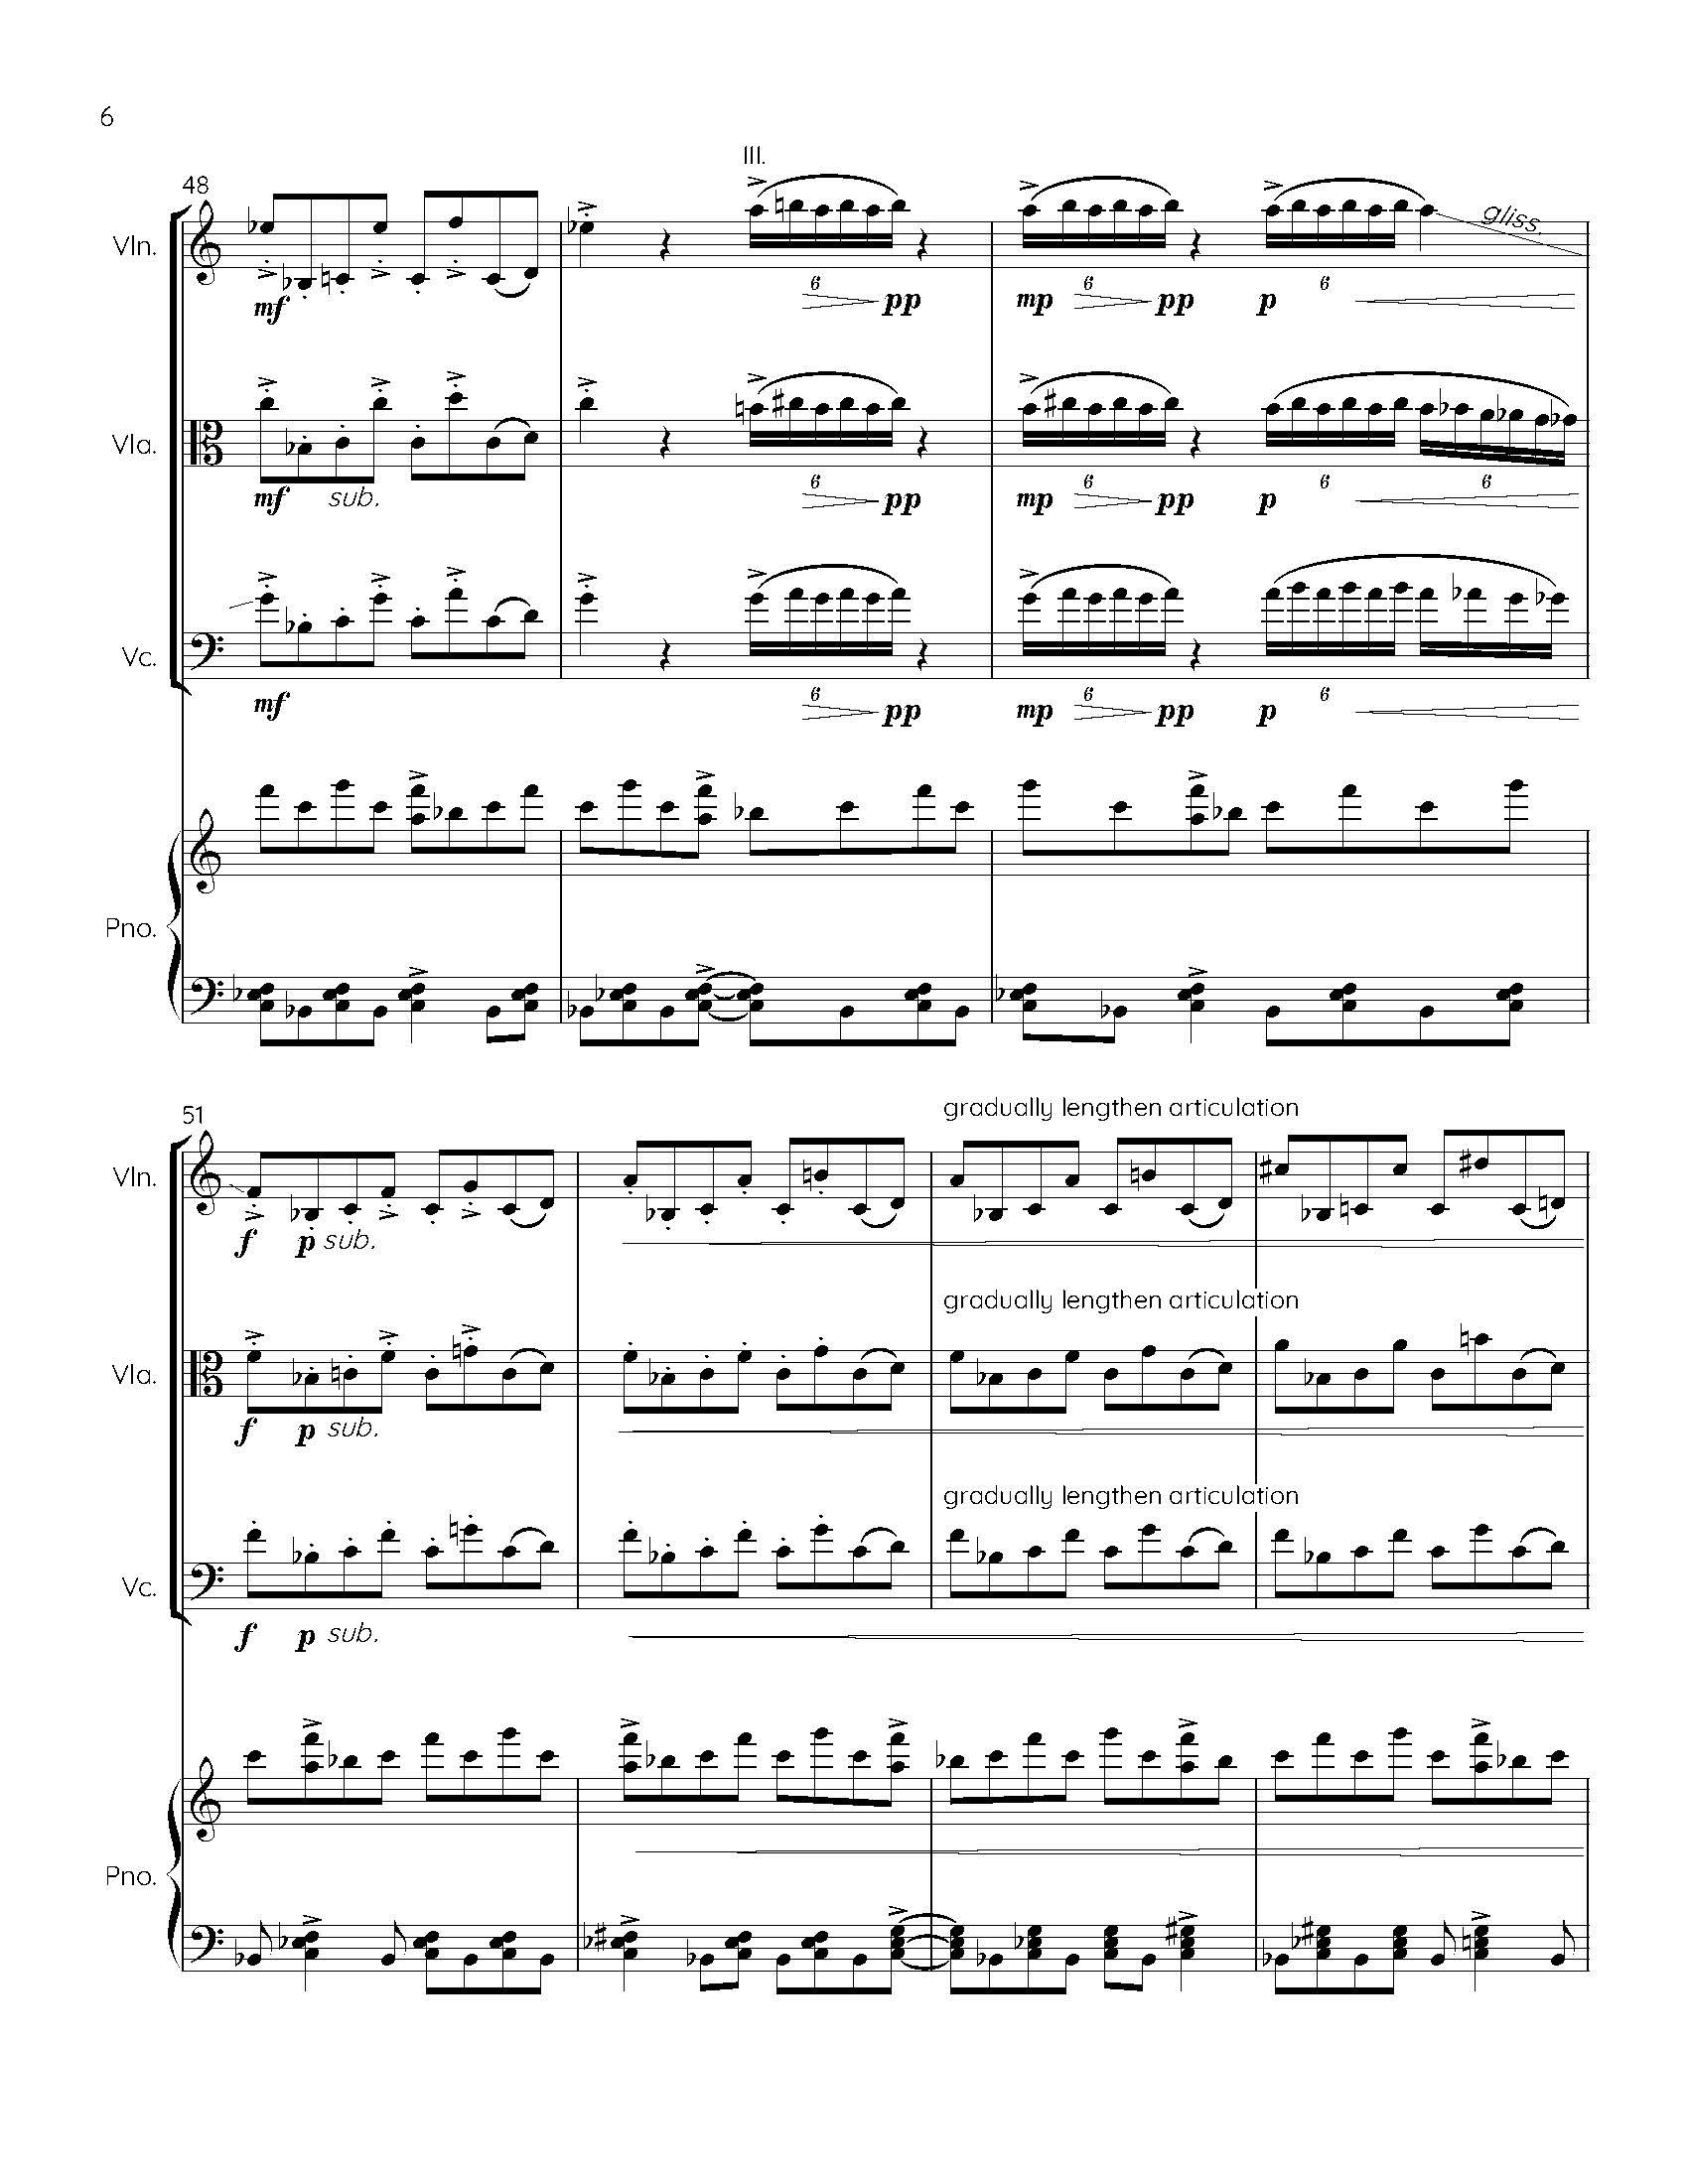 I S L A N D I - Complete Score_Page_12.jpg